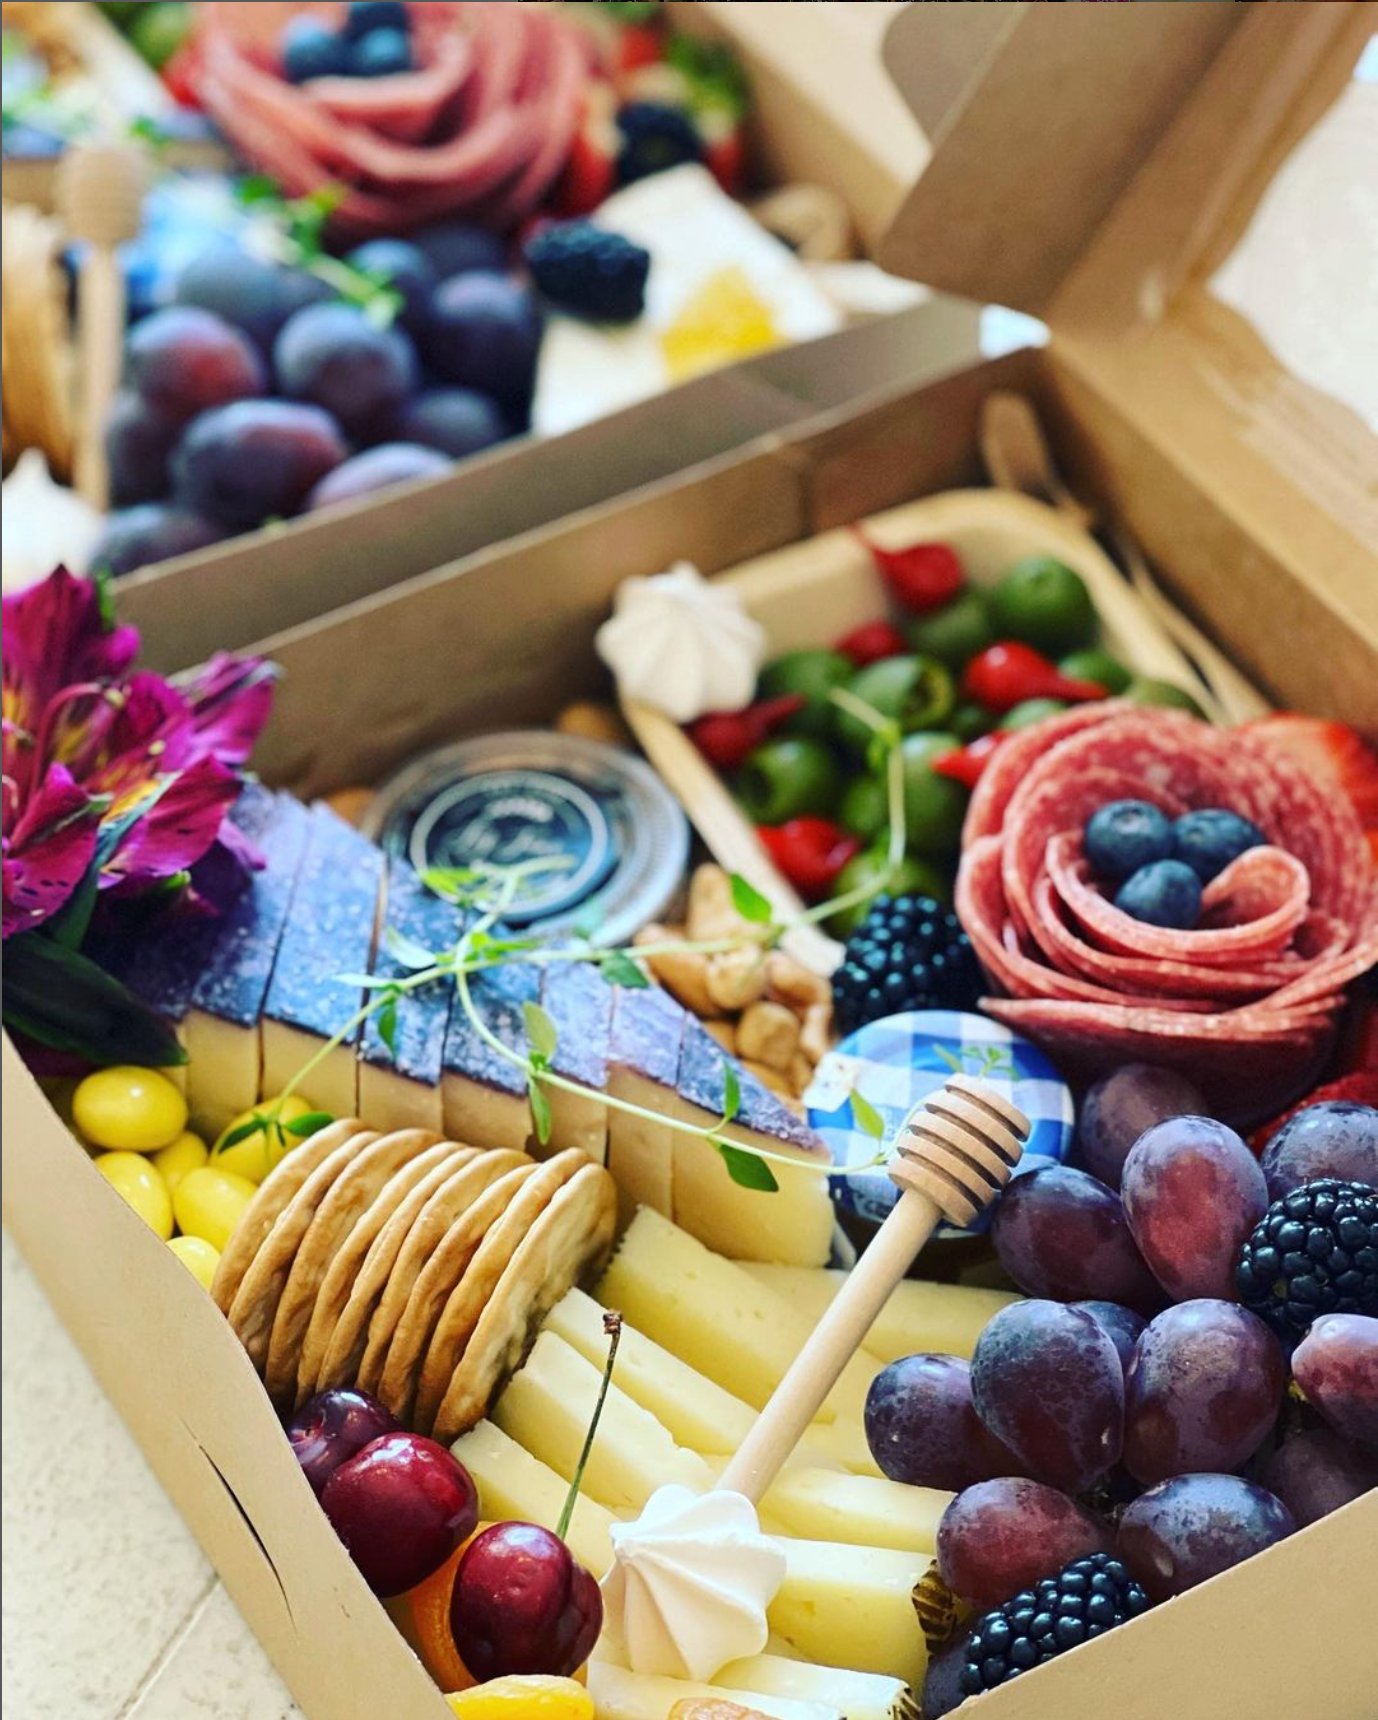 A box filled with a variety of fruits and cheeses